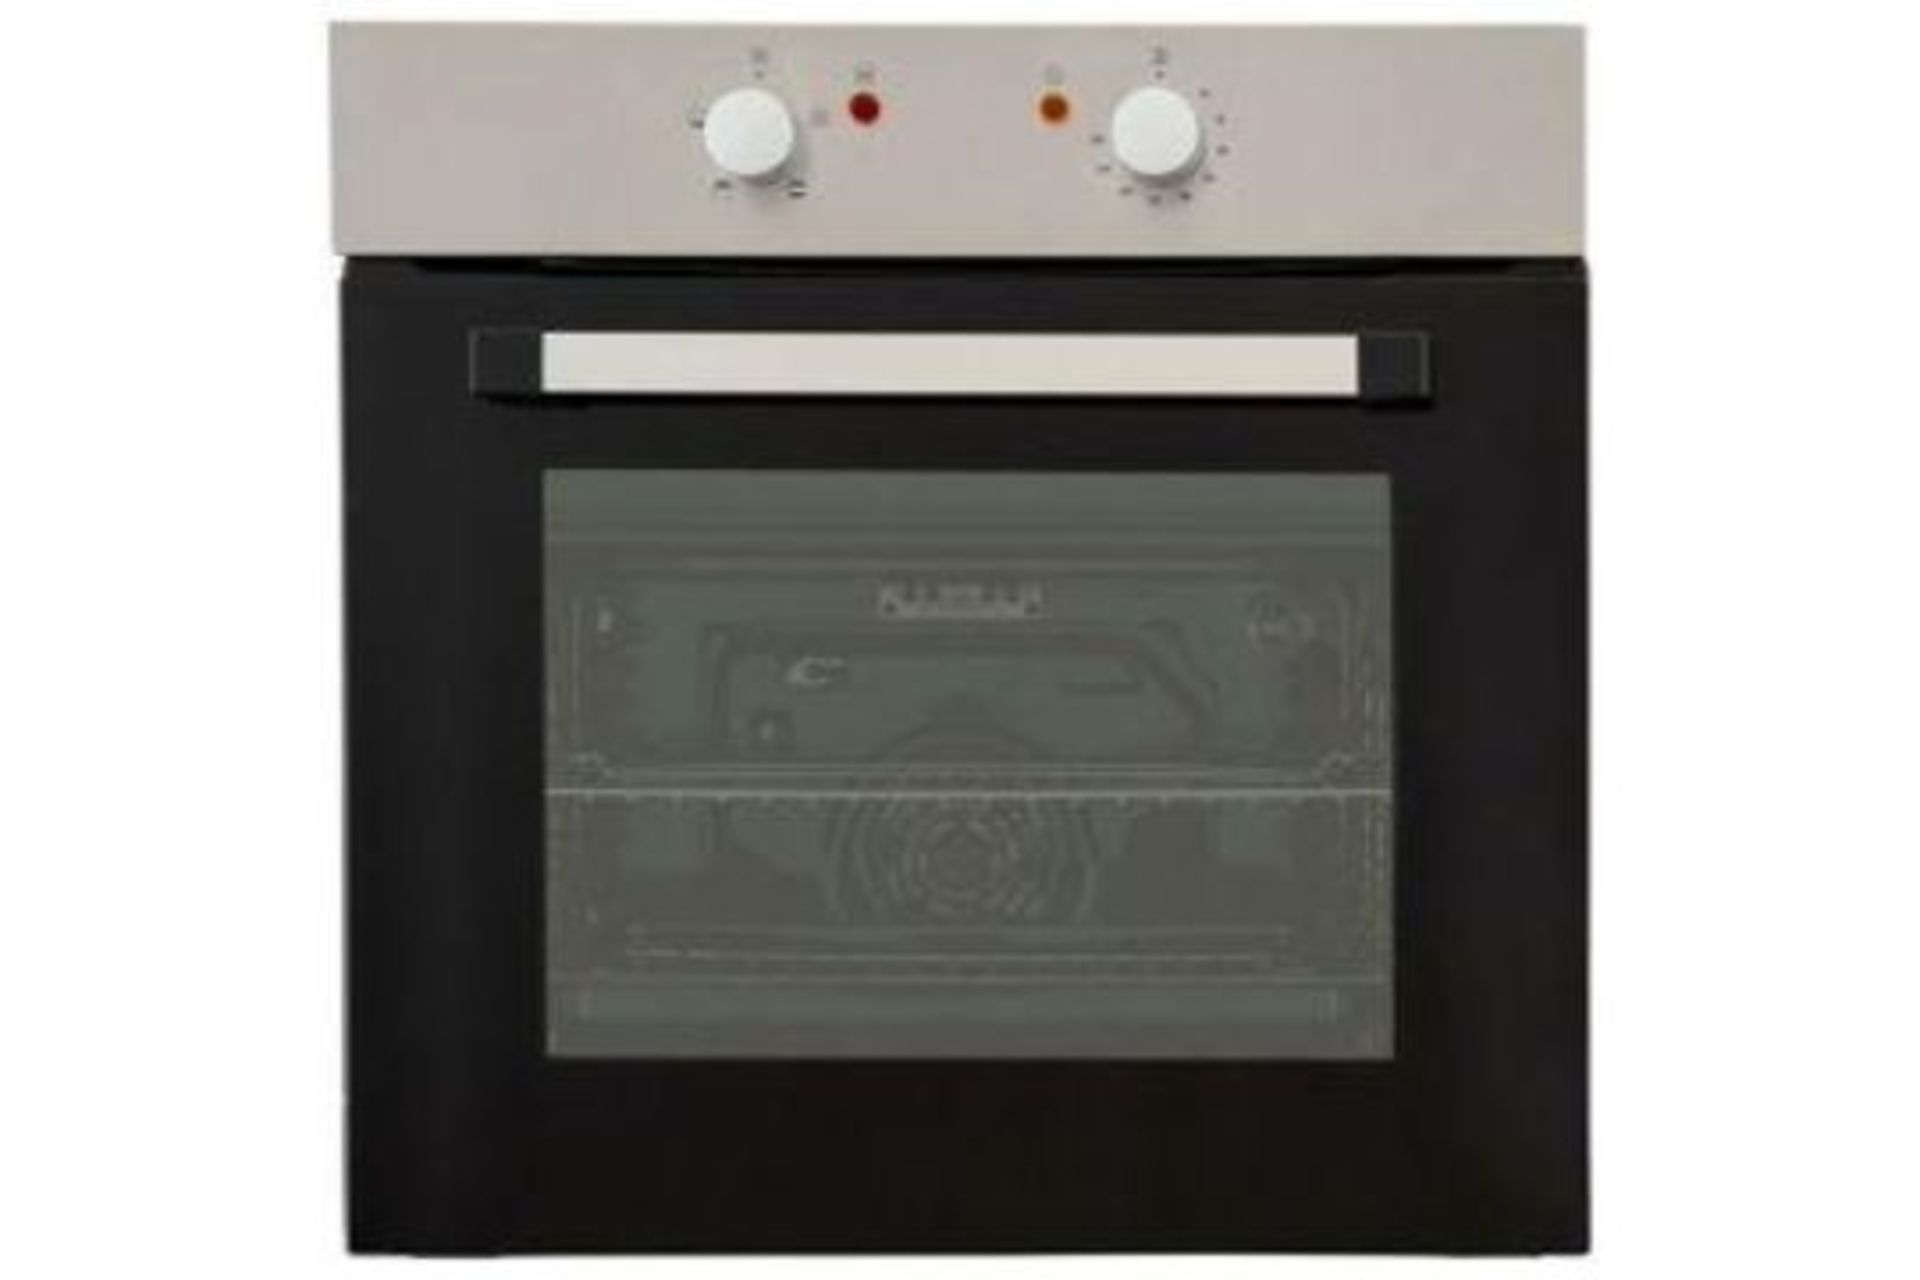 Csb60A Built-in Single Conventional Oven - Chrome Effect (R47)This conventional, single oven has a